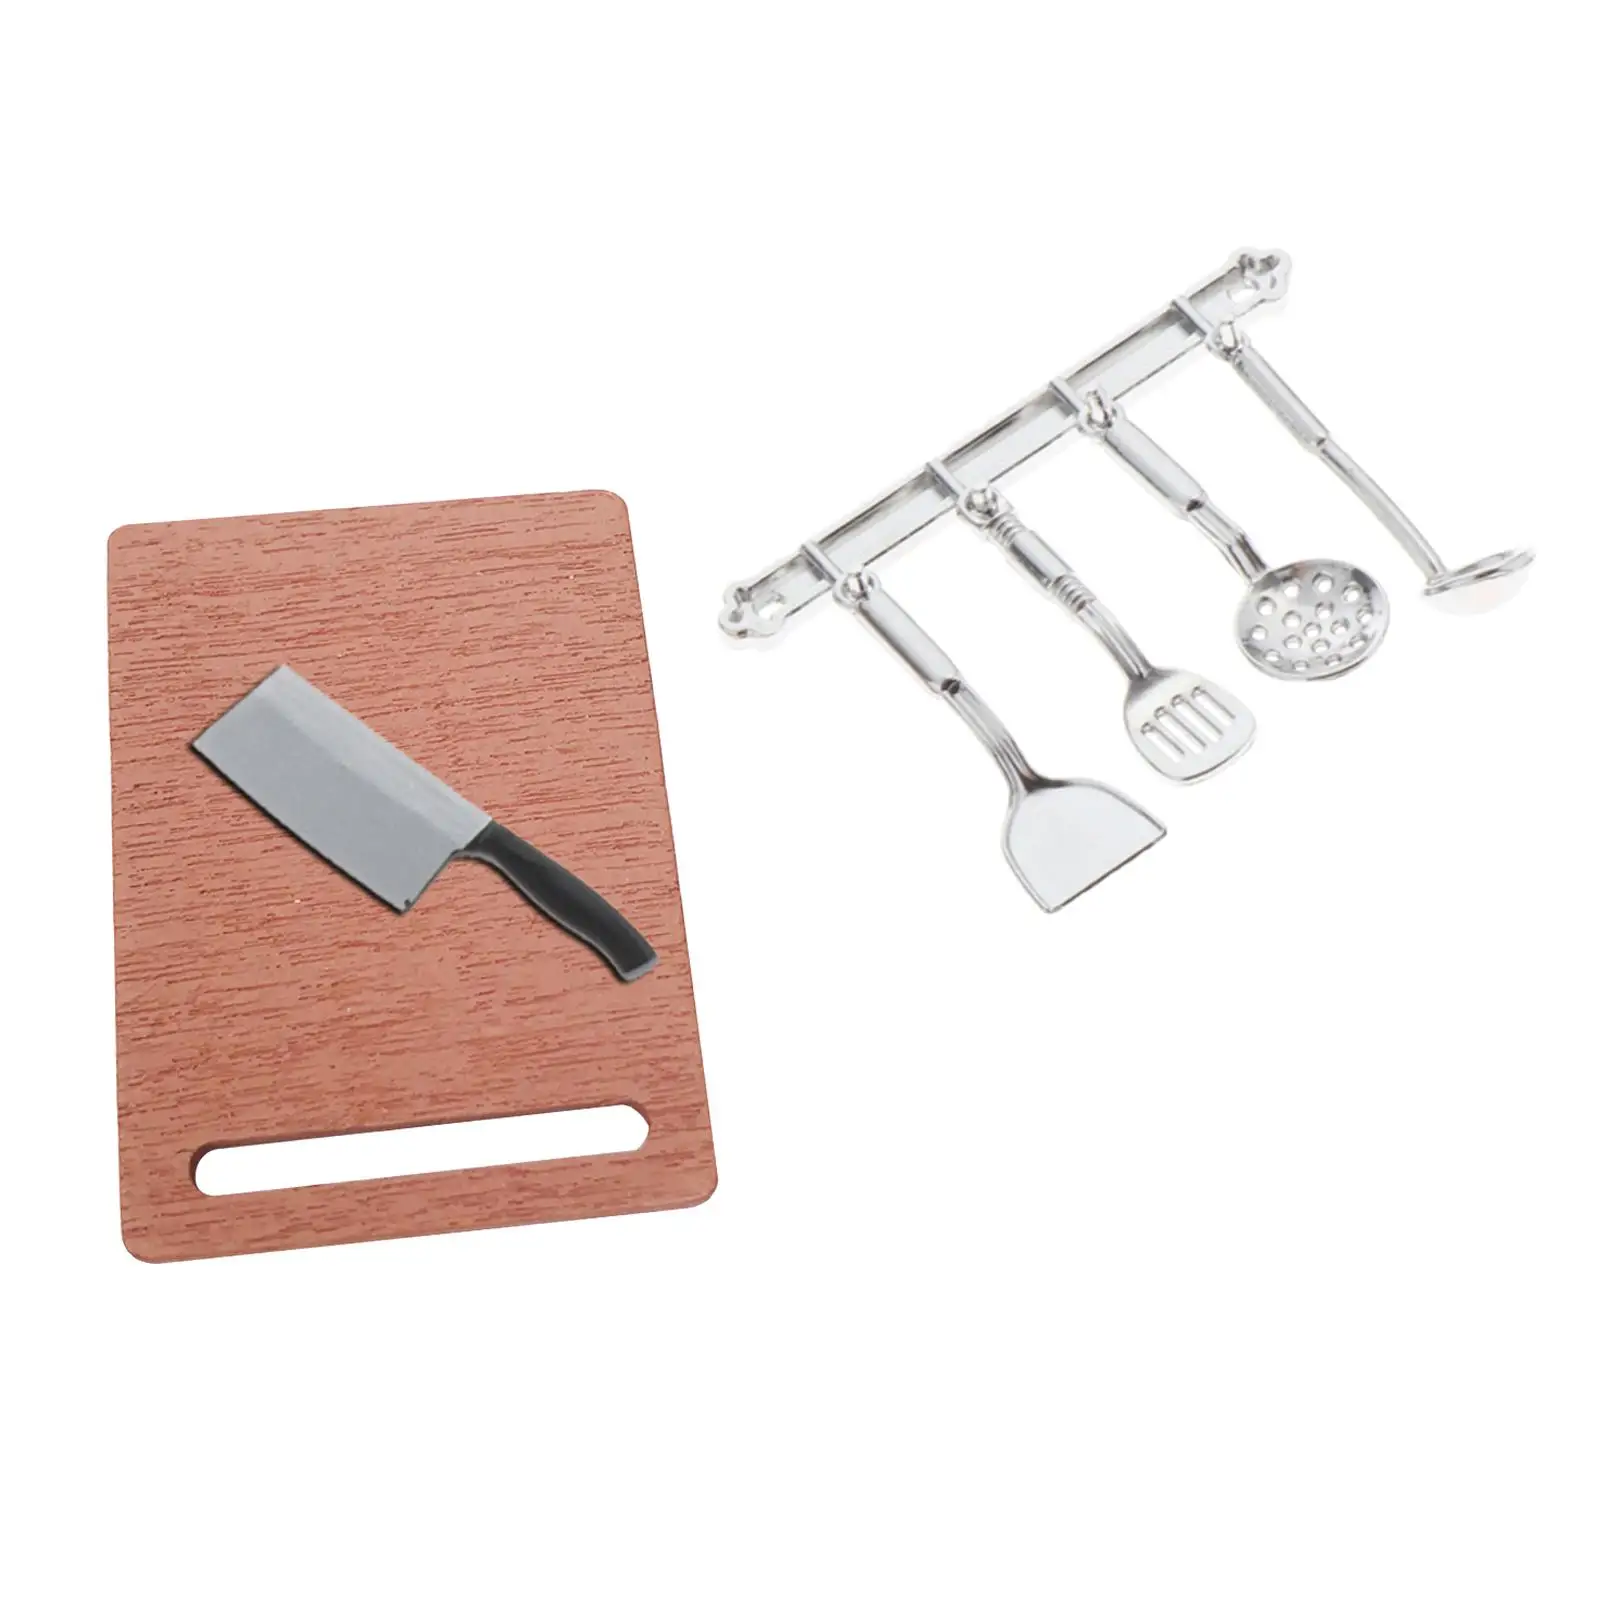 1 12 Scale Dollhouse Miniature Kitchen Utensils Metal Cookware Set for Doll House Accessories and Decoration(7 Pieces)